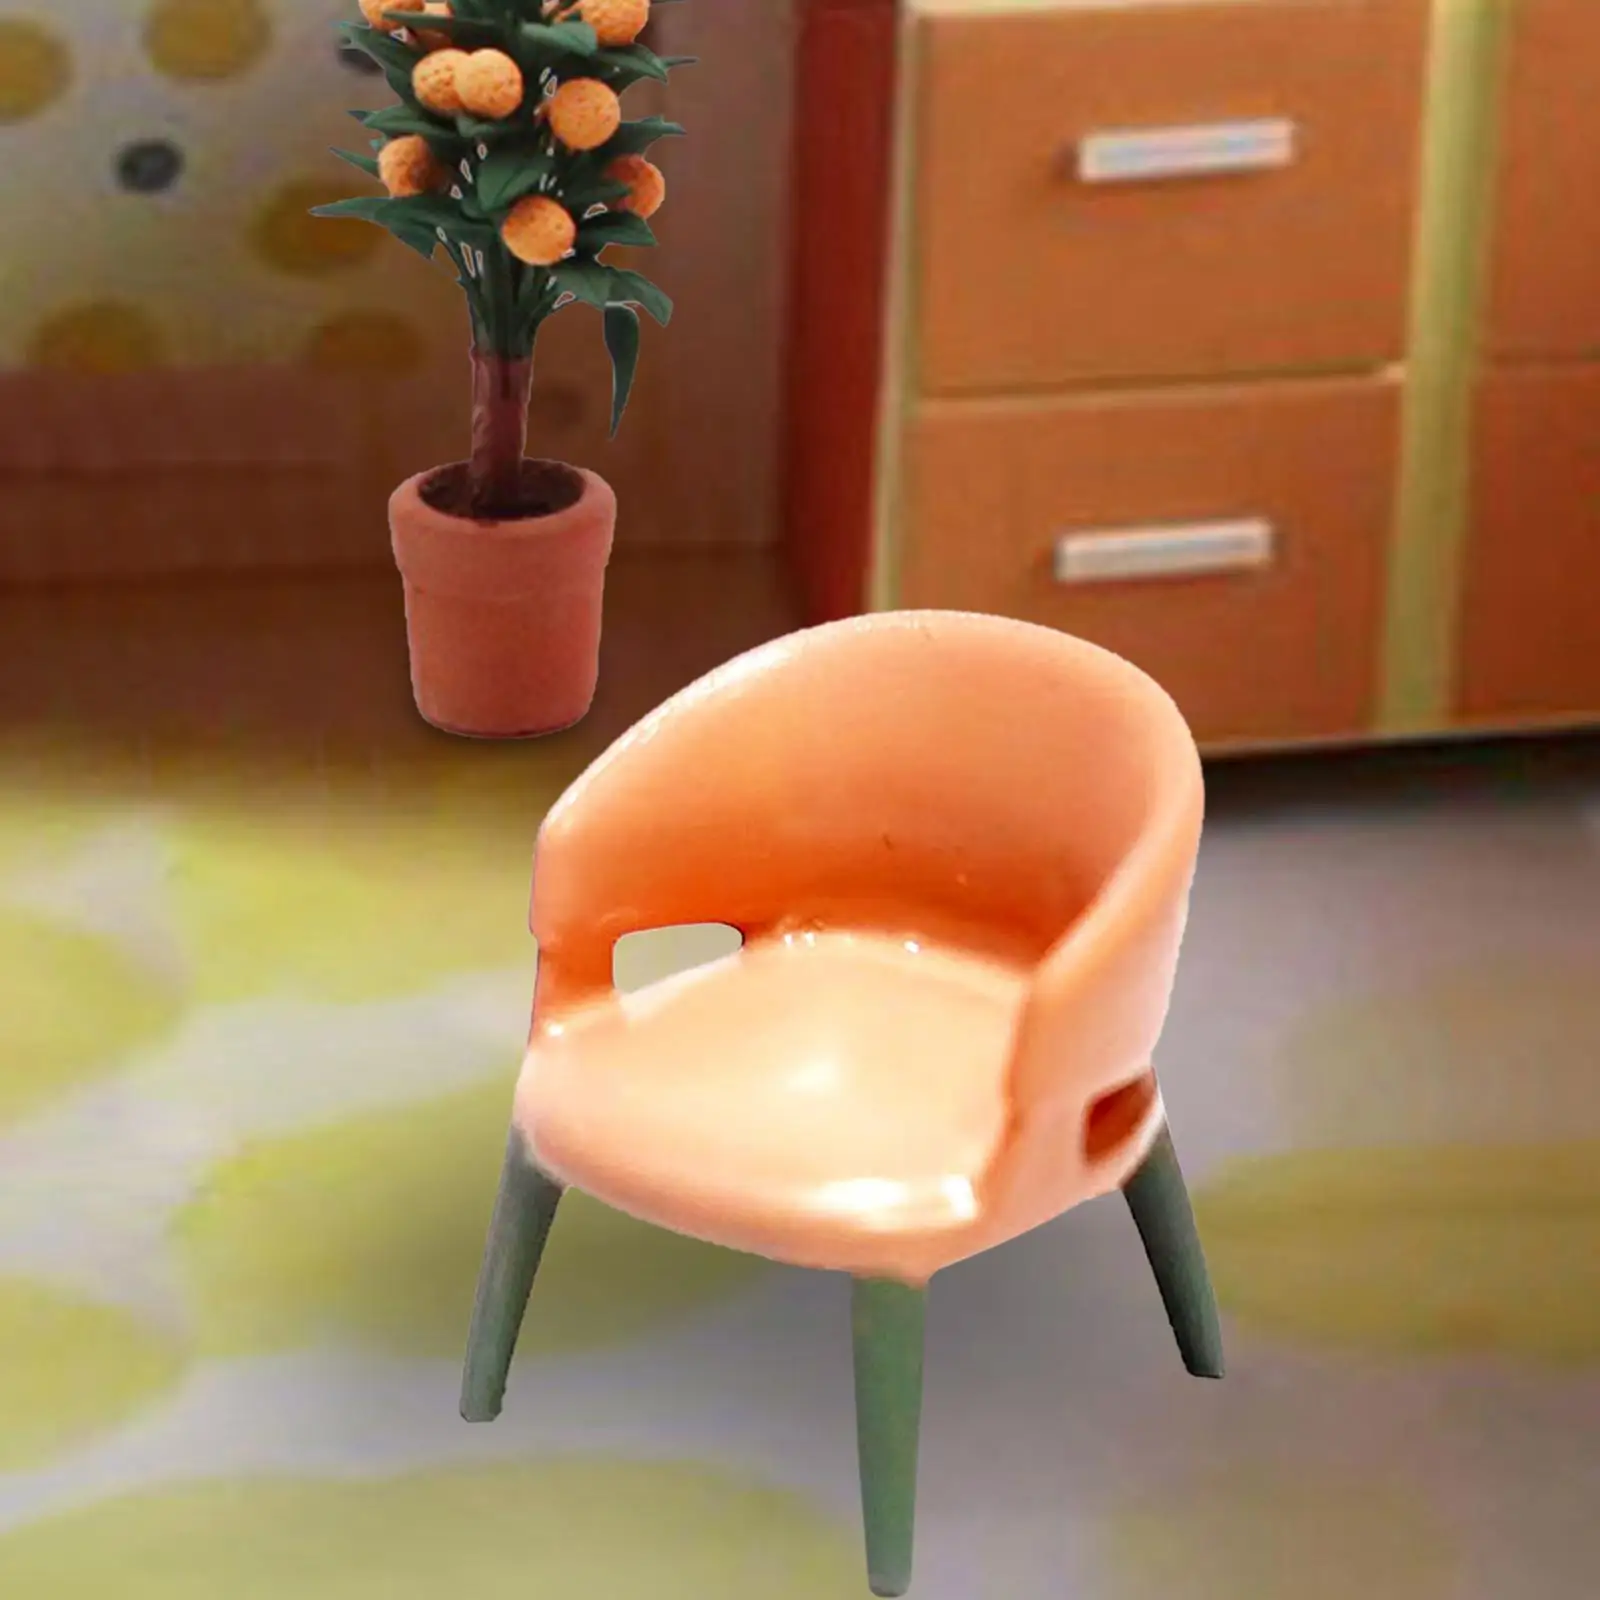 1/87 Scale Chair Model Simulation Figure Realistic Resin Miniature 1/87 Scale Armchair for Dollhouse Decor Photo Prop